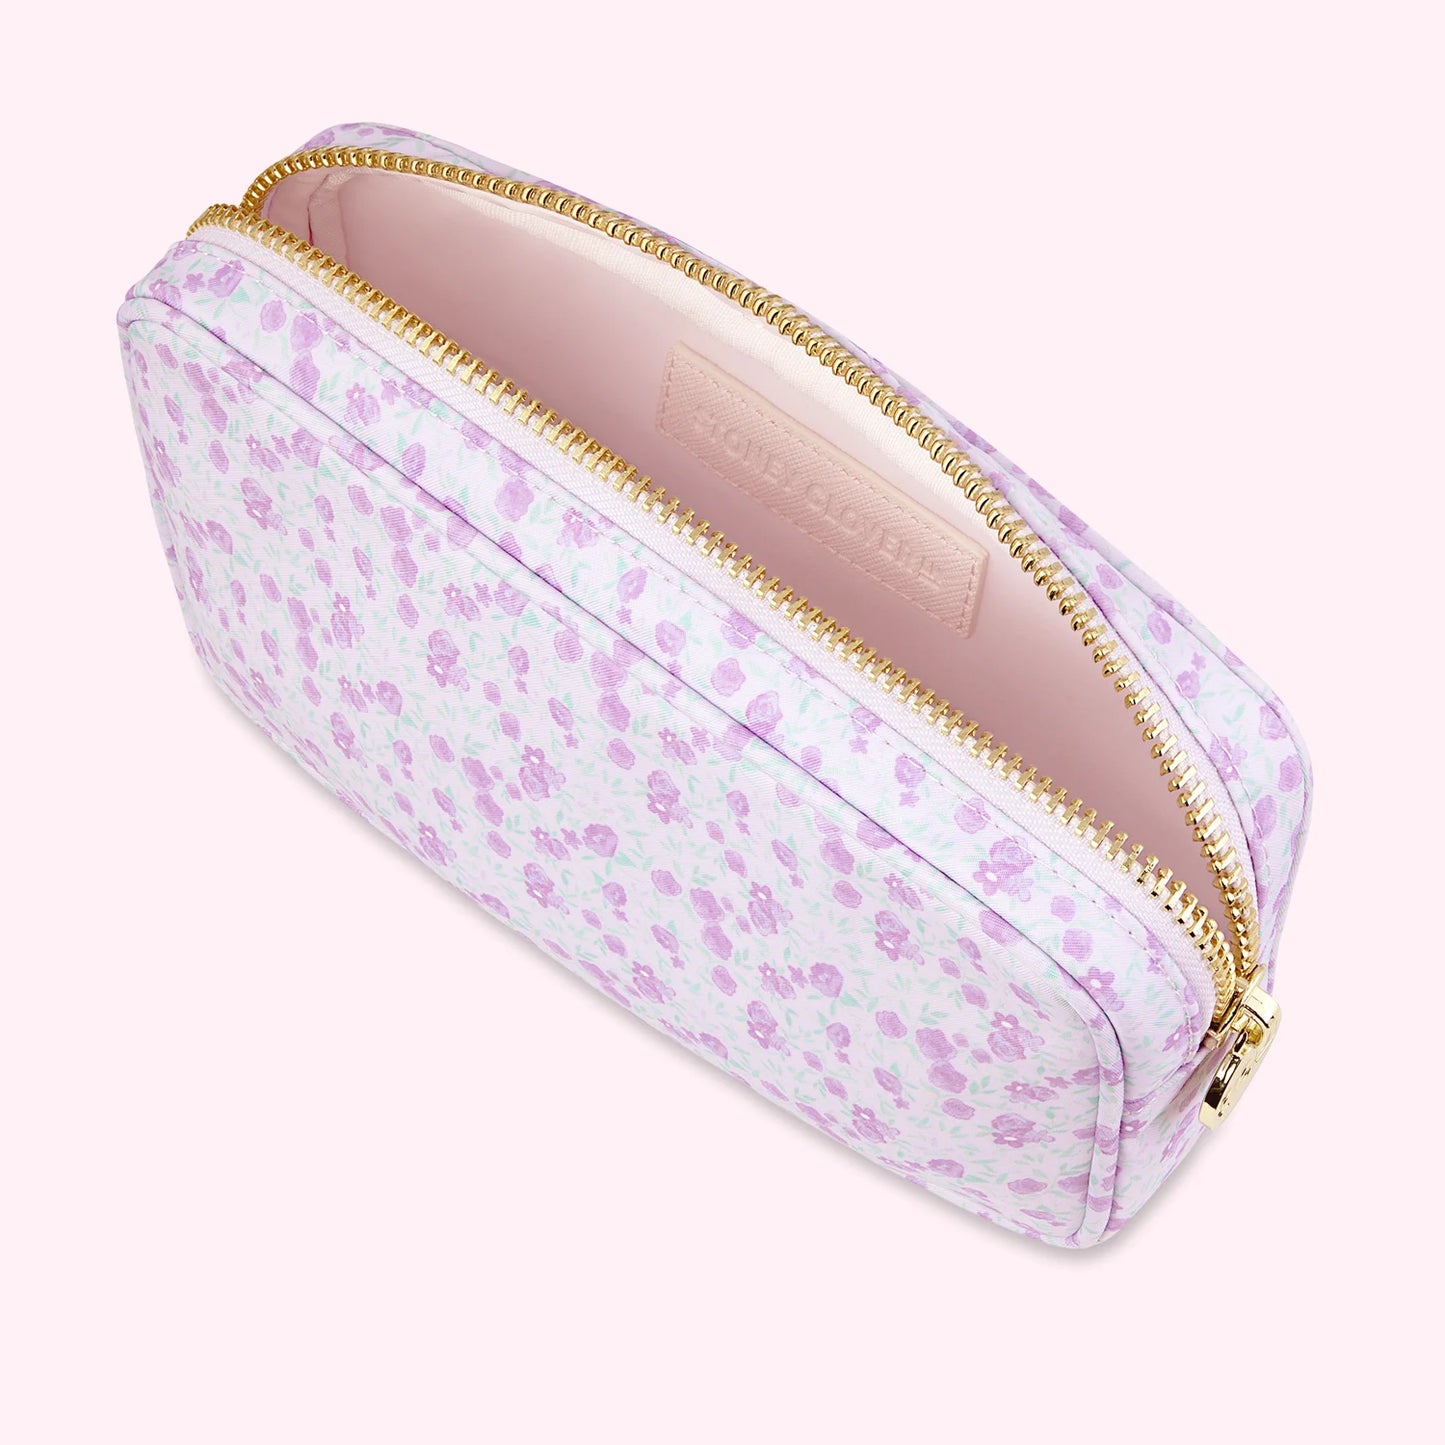 Stoney clover lane- lilac flowers small pouch